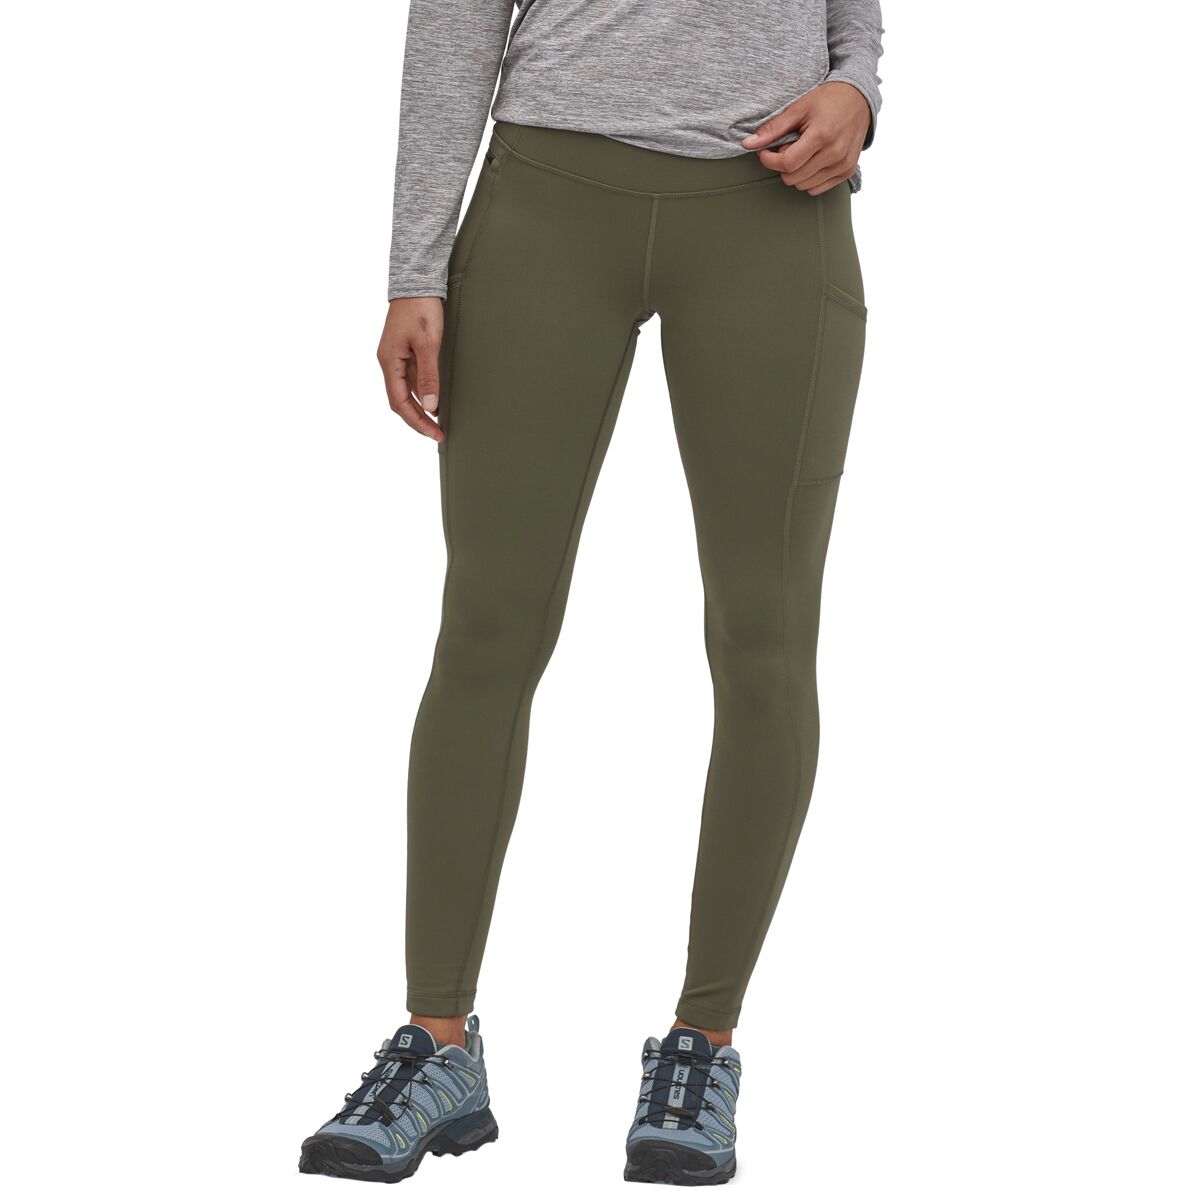 Patagonia Pack Out Tights - Women's Forge Grey/Forge Grey, XL